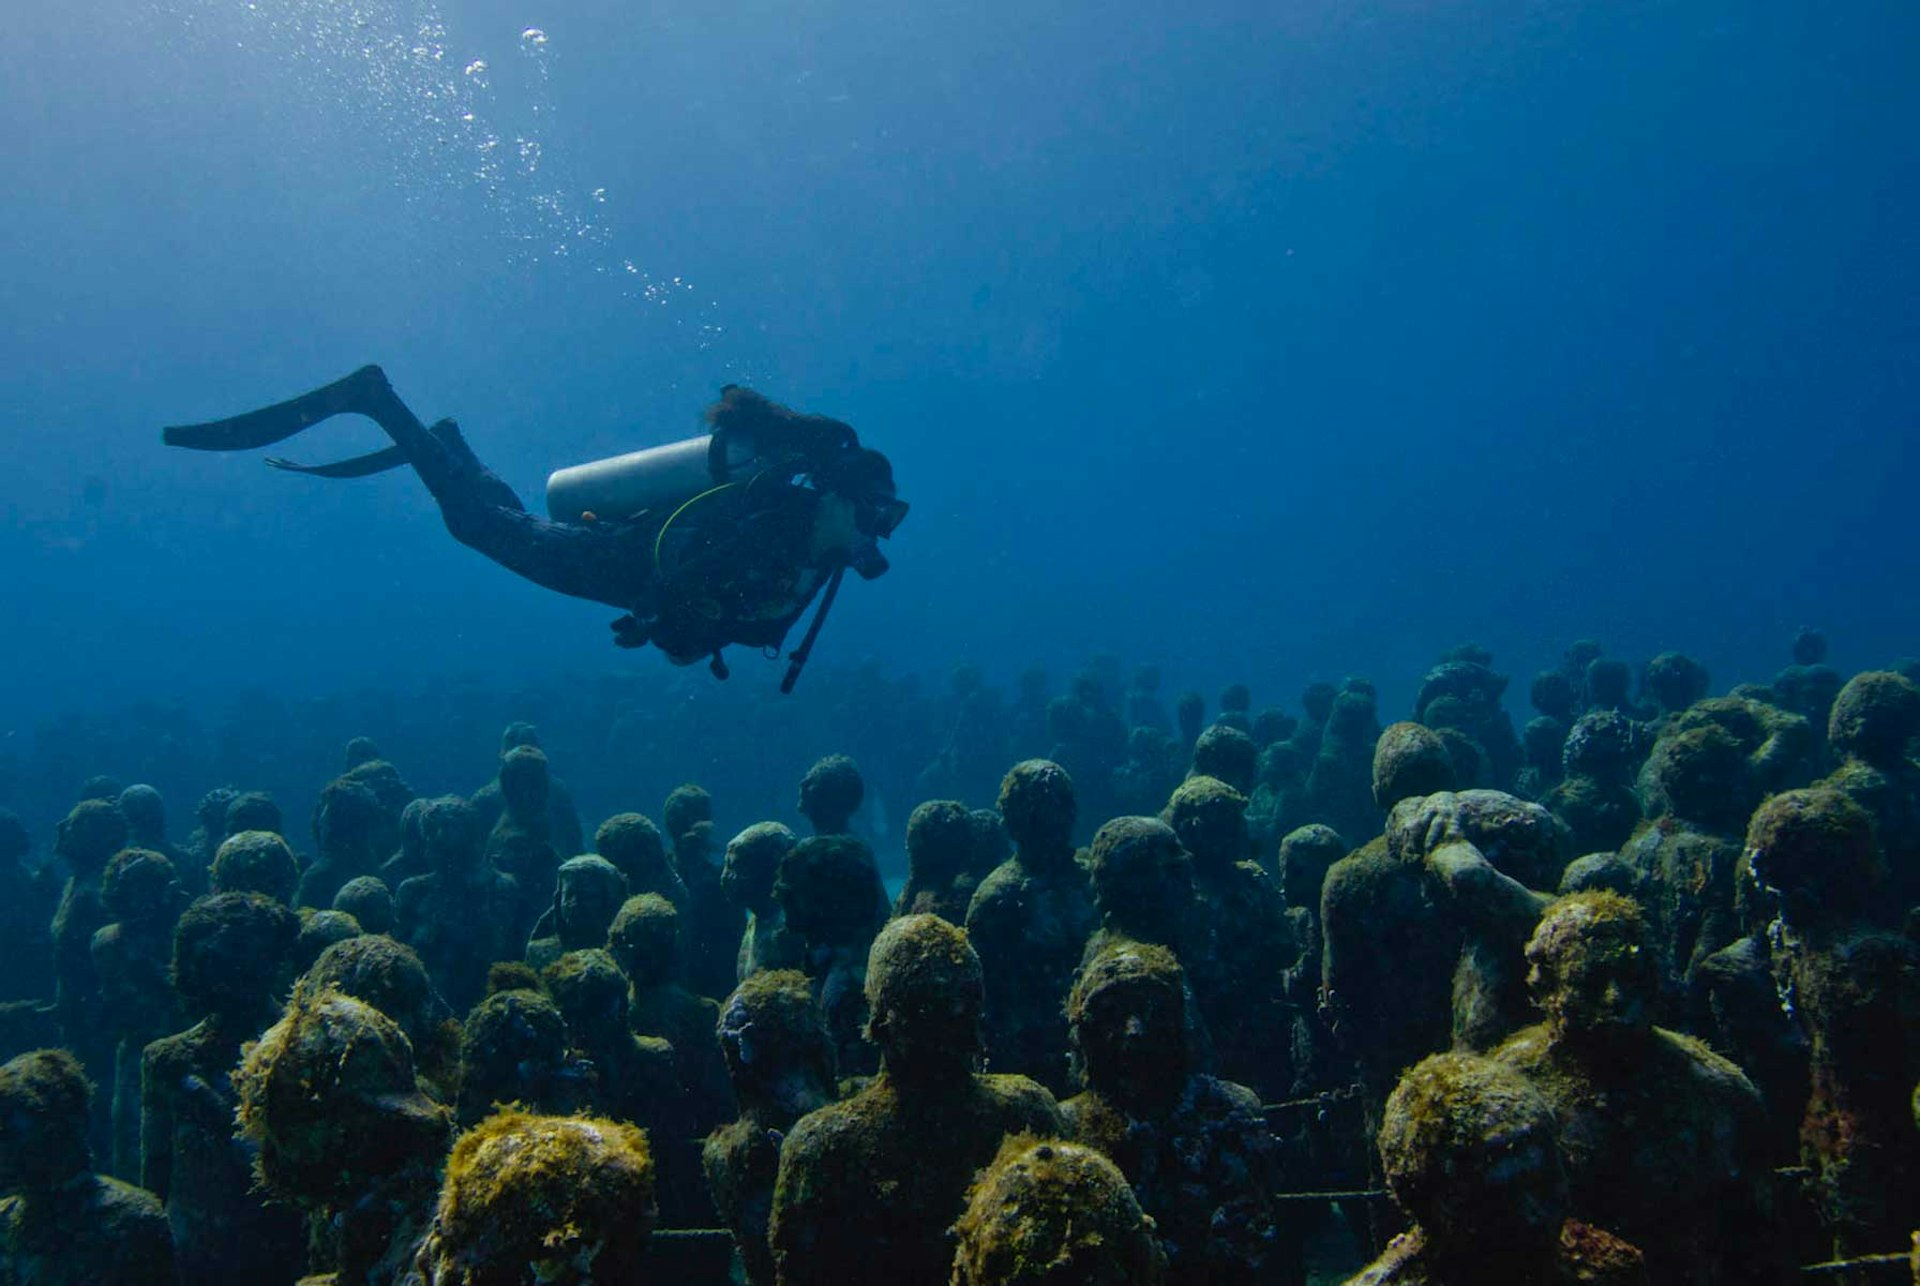 A diver swims above an underwater sculpture made up of many individual standing figures